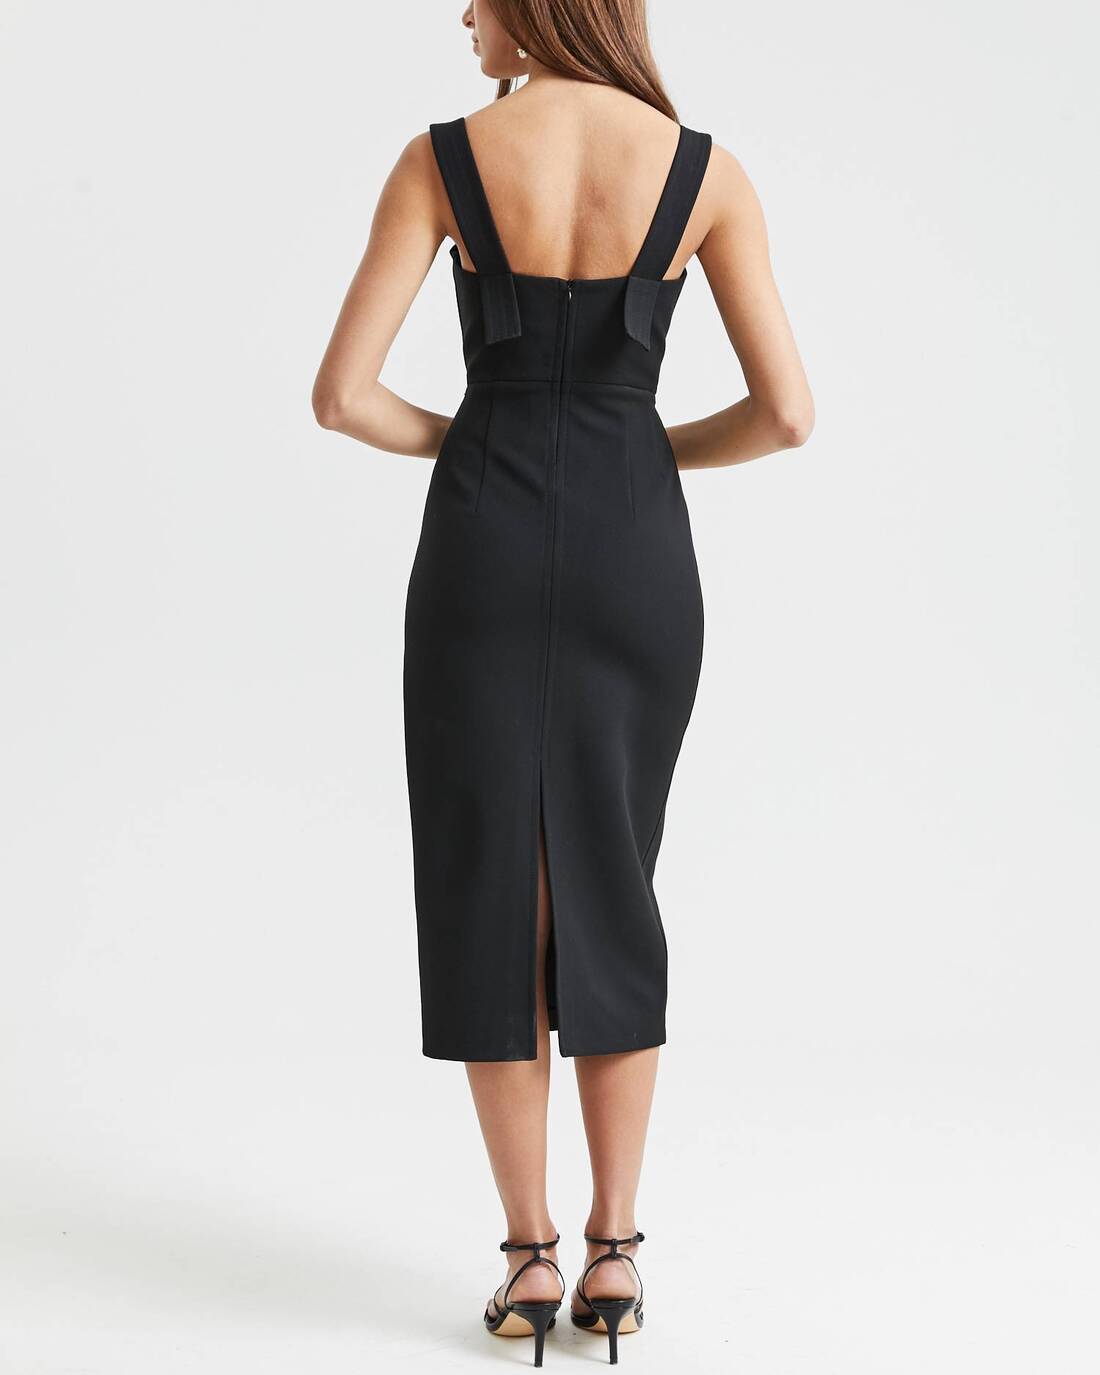 Fitted bustier dress with contrasting stitching